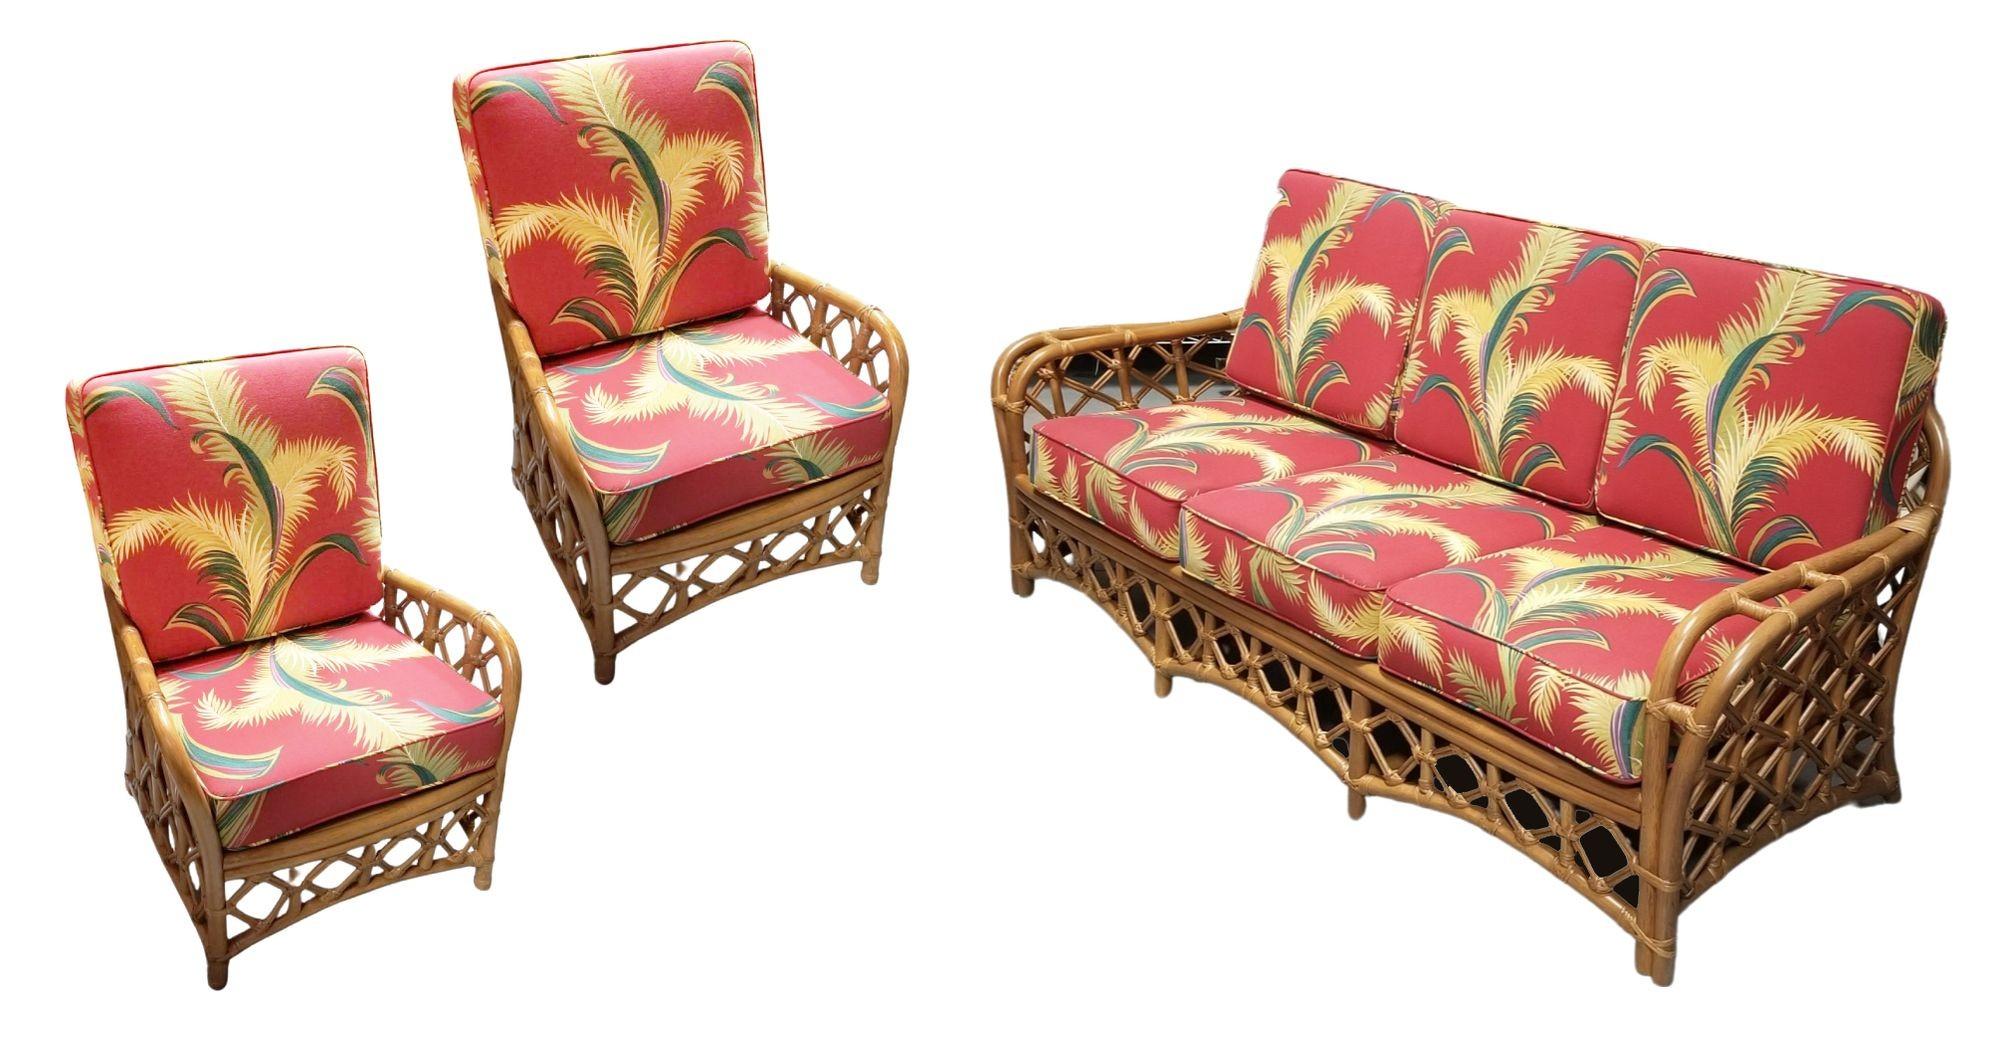 Rare restored Chinoiserie lattice rattan living room with two lounge chairs and a 3-seat sofa by Flicks Reed. Each seat features woven lattice arms with an arched woven lattice back. This style of rattan was an evolution of the stick rattan